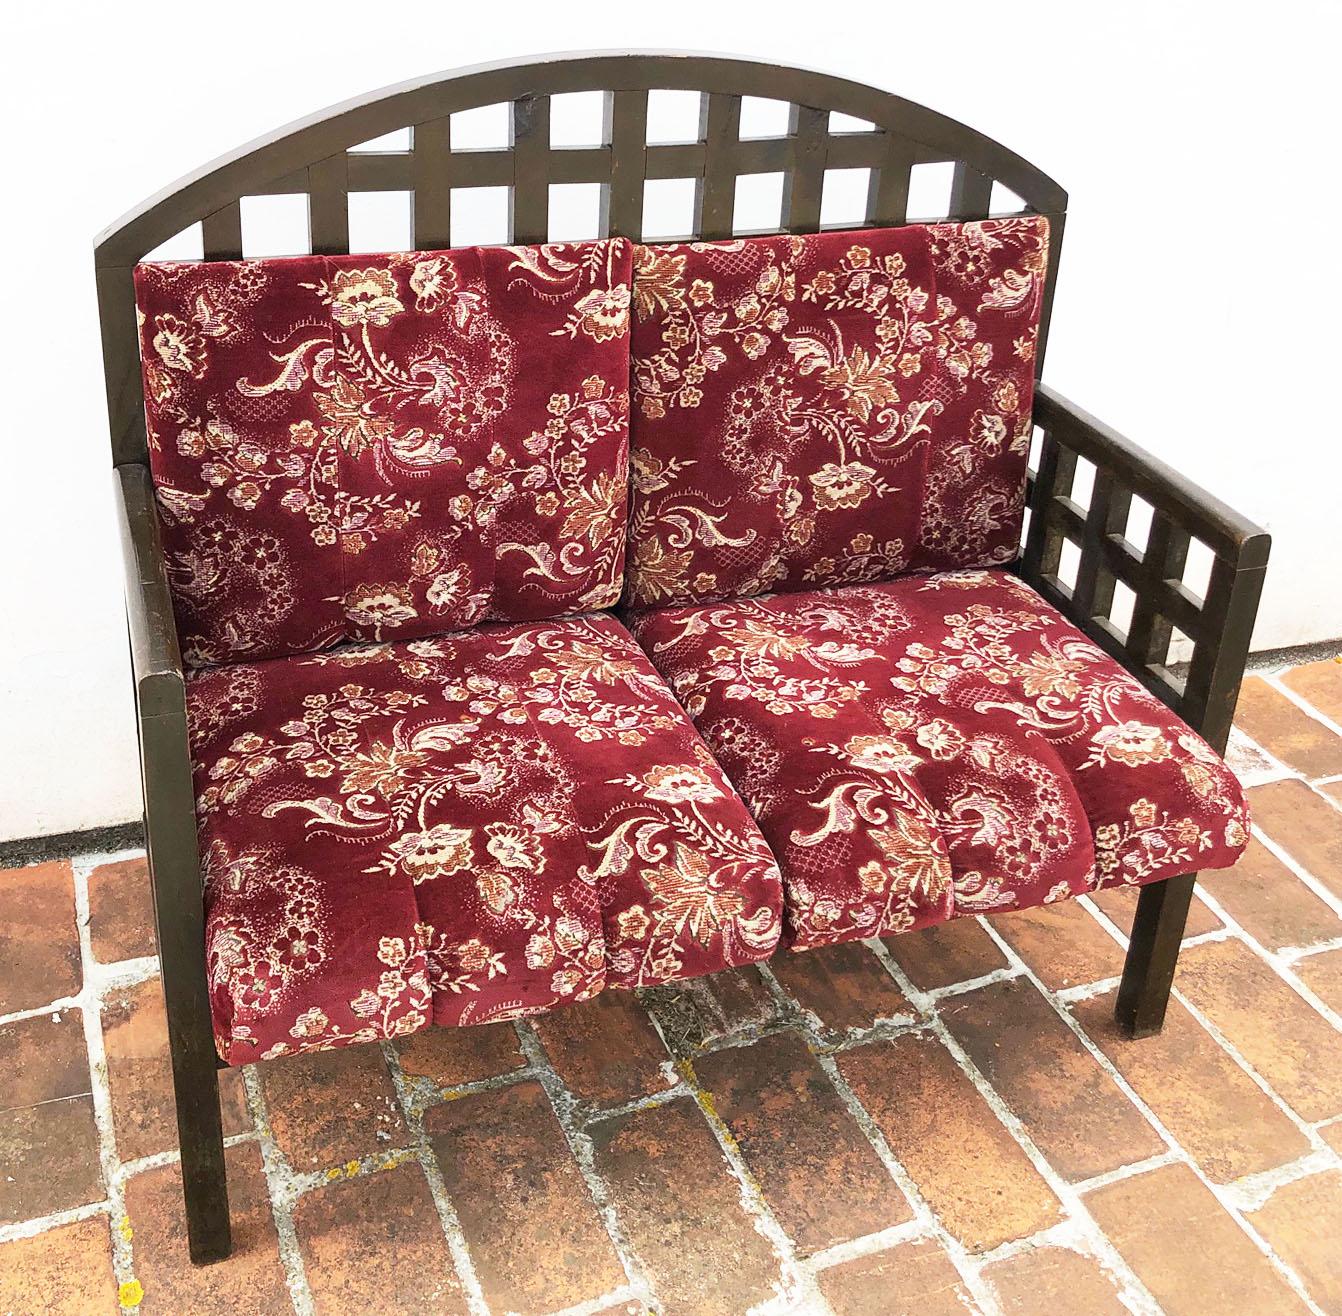 Original Italian beech sofa from 1940 with damask cushions, particular design.
Comes from an old country house in the Chianti area of Tuscany.
The paint is original in patina, honey amber color. 
There is a small hole in the right seat cushion
As